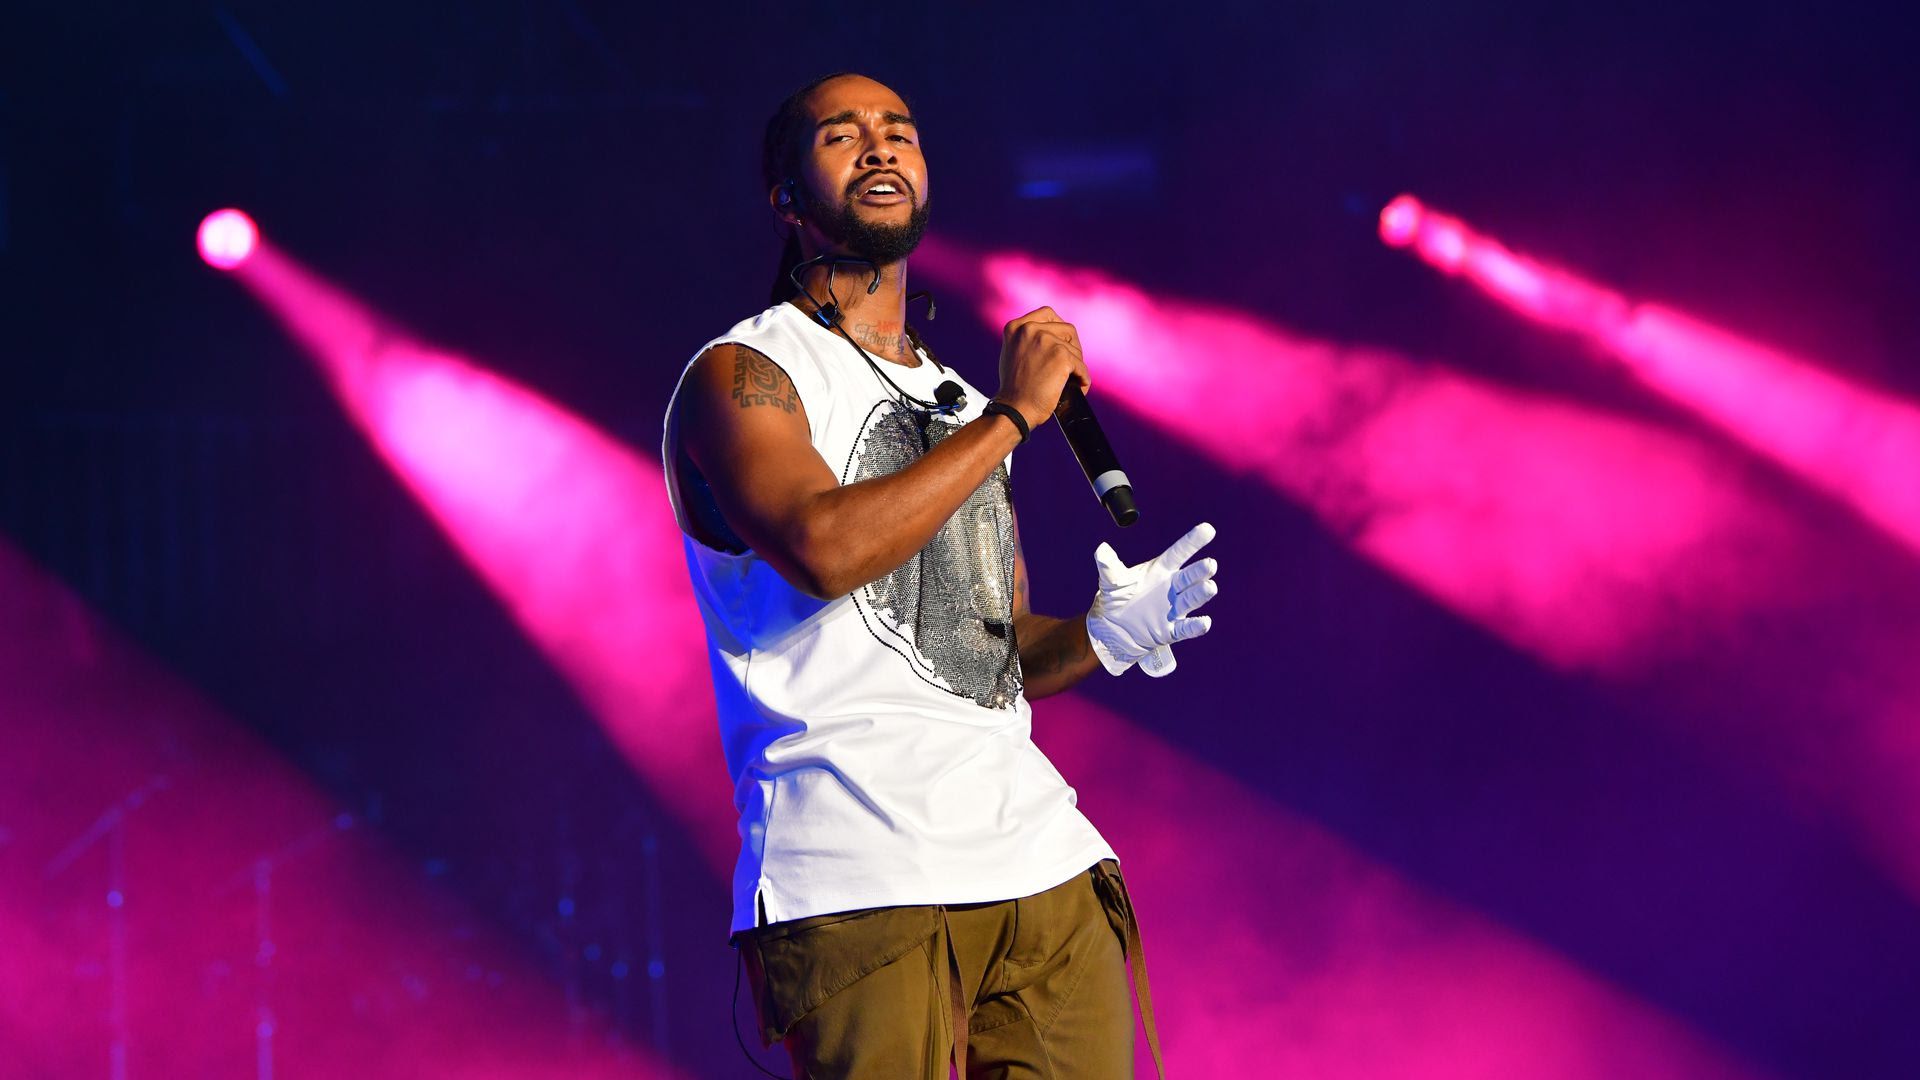 Omarion performing